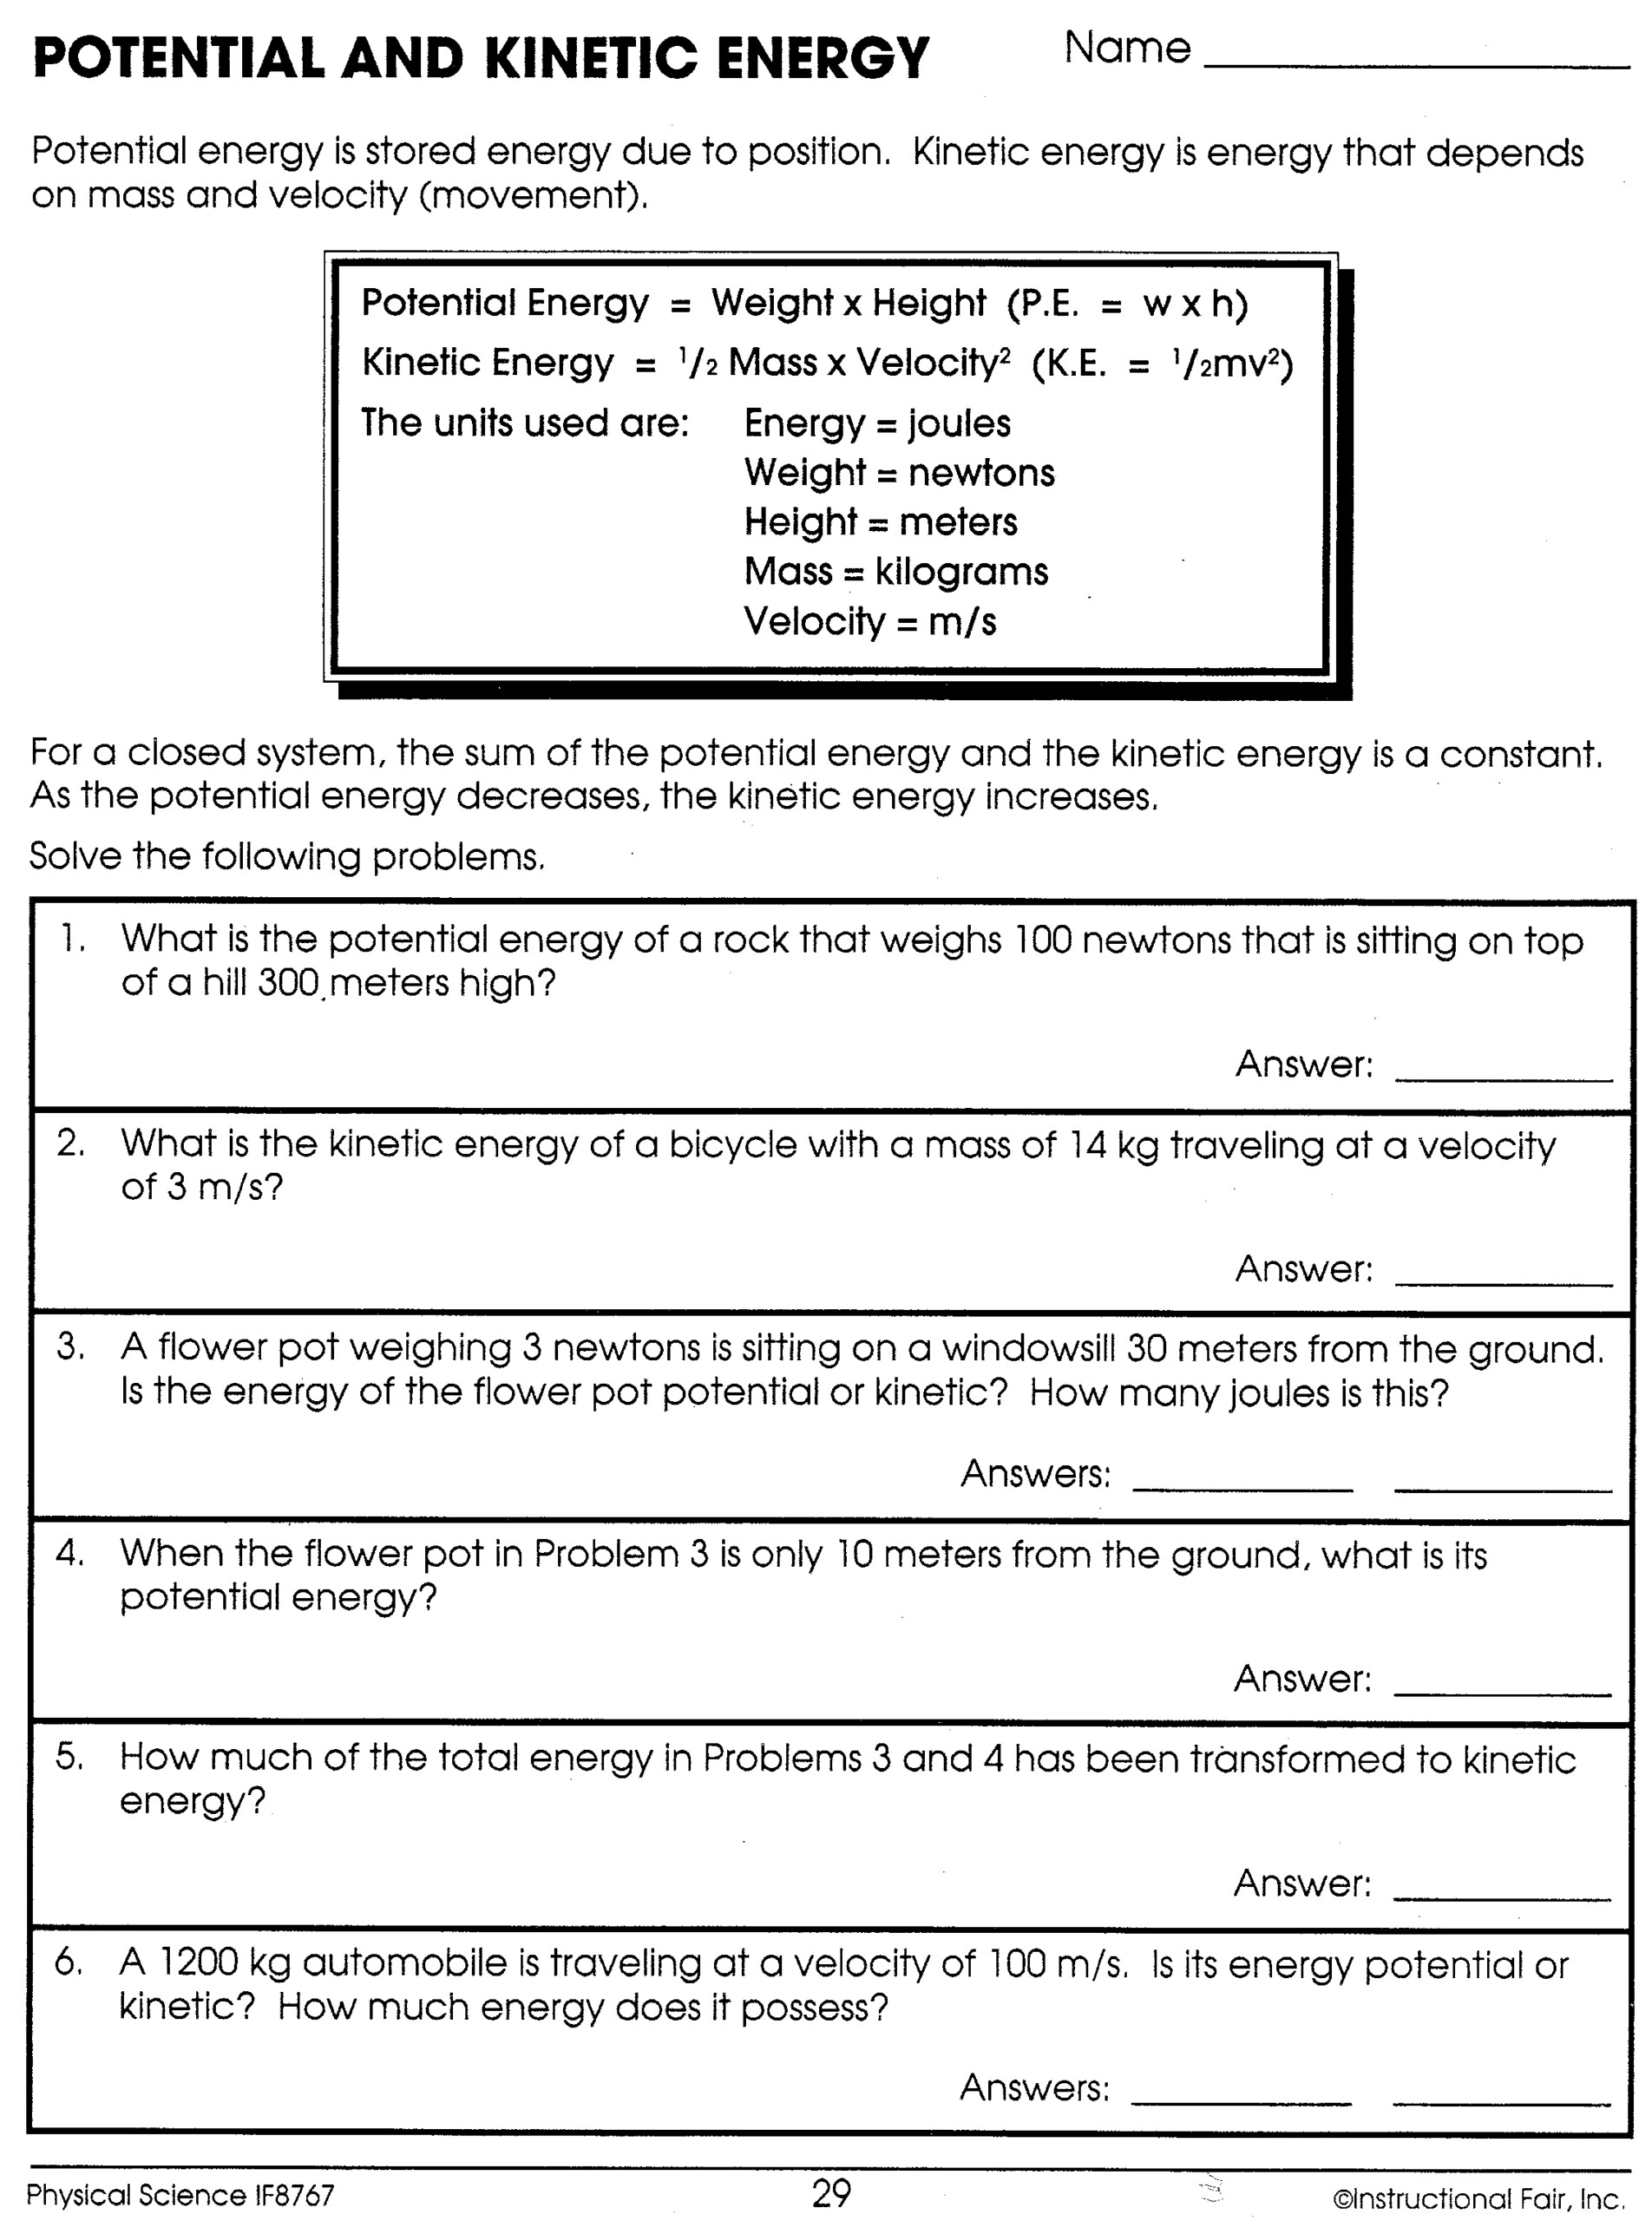 POTENTIAL ENERGY QUOTES Kinetic And Potential Energy Potential And